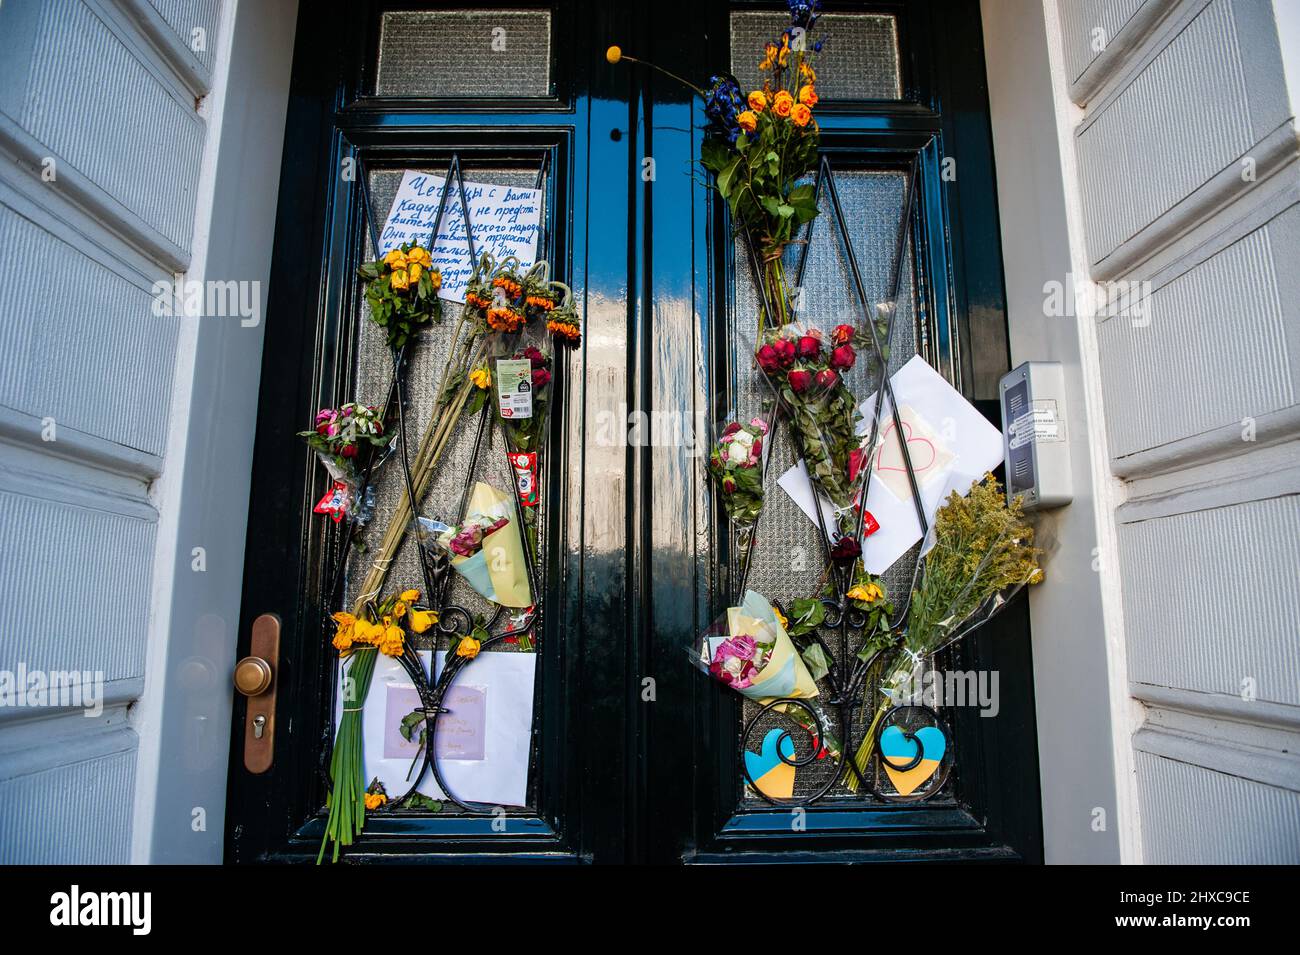 The door of the Embassy of Ukraine in The Netherlands decorated with flowers and placards in support of Ukraine and against war. Since Putin's invasion of Ukraine started two weeks ago, the facade of the Ukrainian Embassy in The Hague has been decorated with flowers, Ukrainian flags, placards, and messages in support of the Ukrainian people. At least 1.4 million people have left Ukraine since Russia invaded last month and around 516 civilians have been killed and 908 injured in the fighting. U.N. monitors said 37 children have been killed and 50 injured since the start of the conflict. (Photo Stock Photo